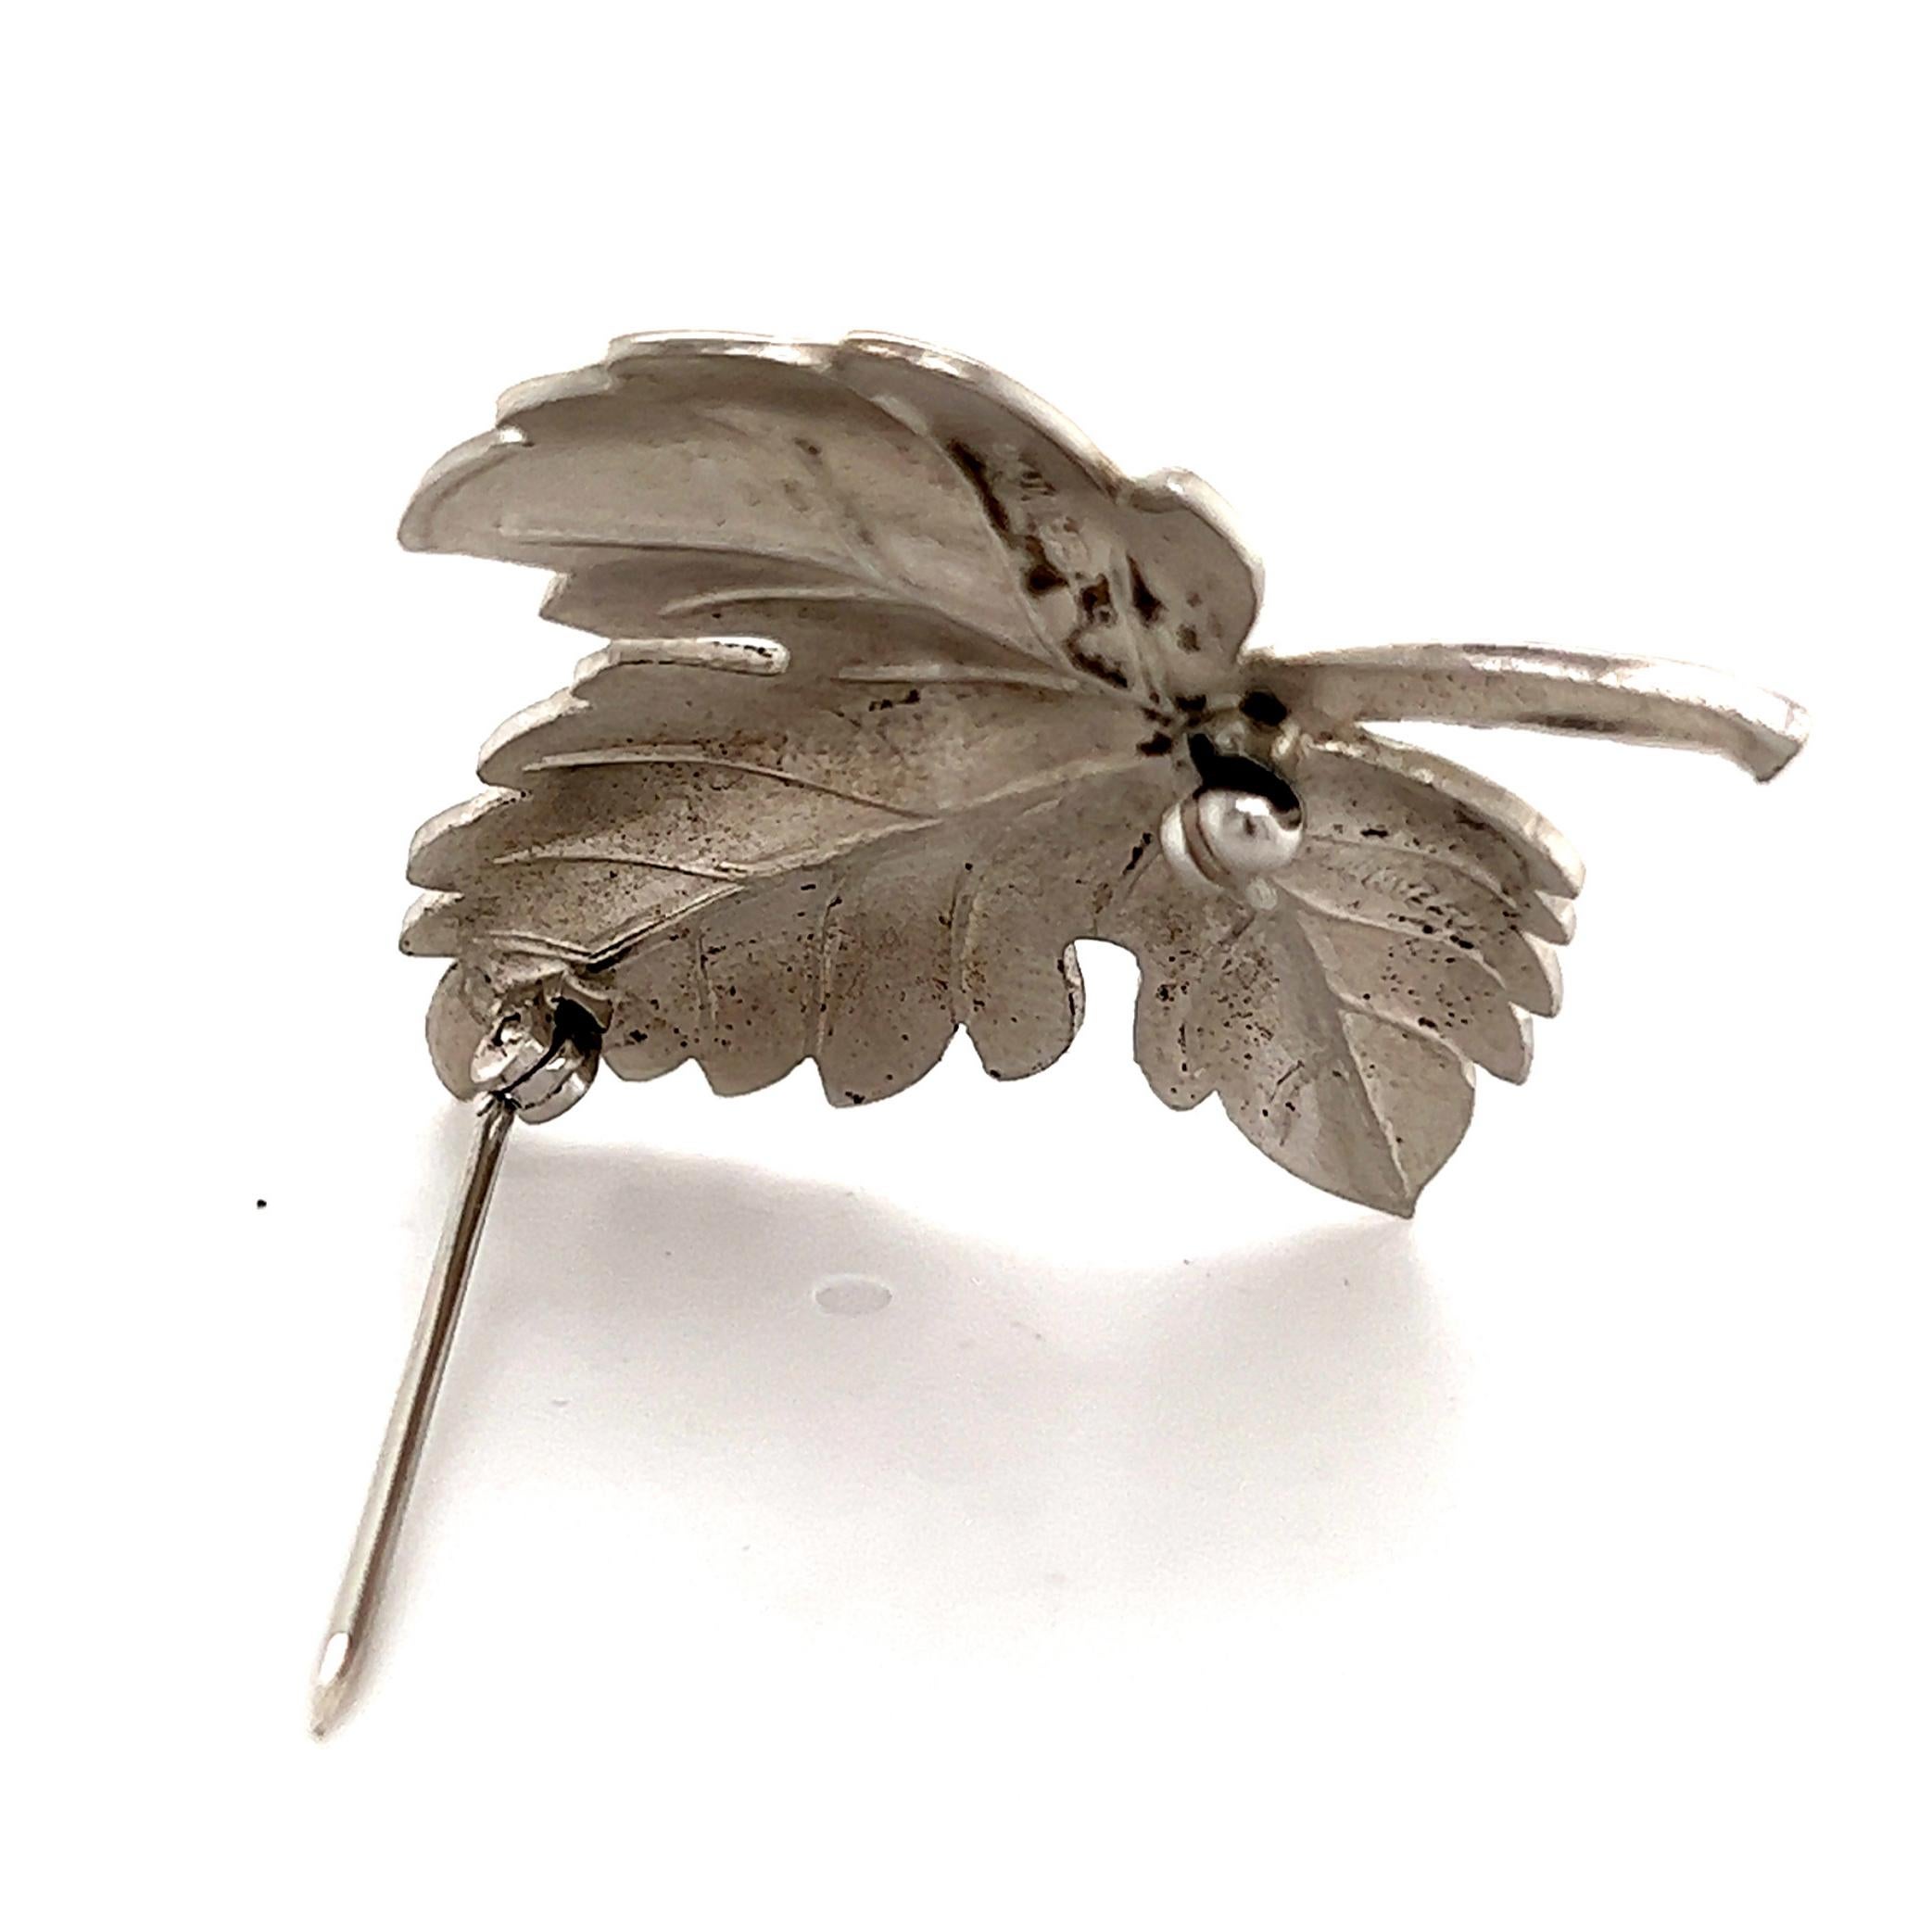 Tiffany & Co Estate Leaf Brooch Pin Sterling Silver 7 Grams TIF345

TRUSTED SELLER SINCE 2002

PLEASE SEE OUR HUNDREDS OF POSITIVE FEEDBACKS FROM OUR CLIENTS!!

FREE SHIPPING!!

DETAILS
Style: Leaf
Weight: 7 Grams
Metal: Sterling Silver

The Tiffany